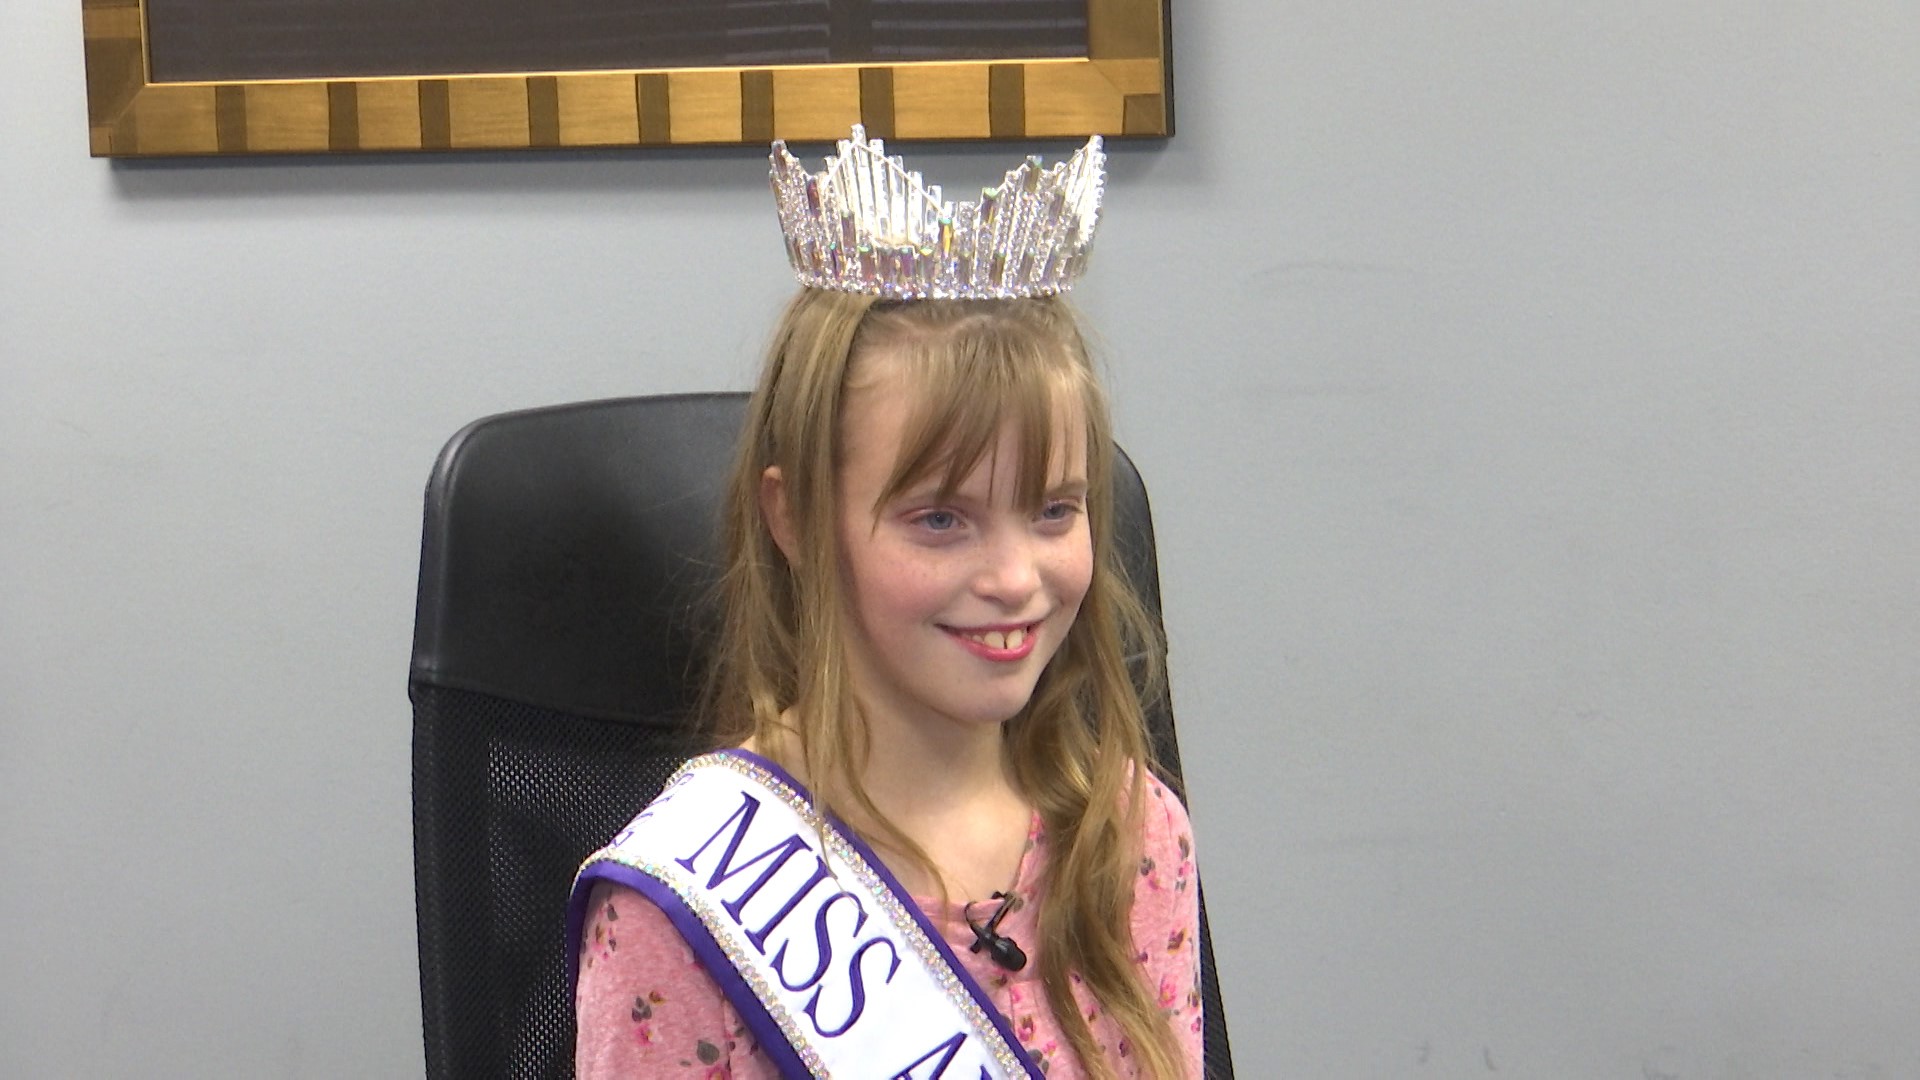 Miss Alabama Pre-teen 2019, Arabella Rouse, is partnering with Good Samaritan of Huntsville to collect new pairs of socks to give to those in need. Rouse is asking for donations of mens, womens, kids, and infant socks.